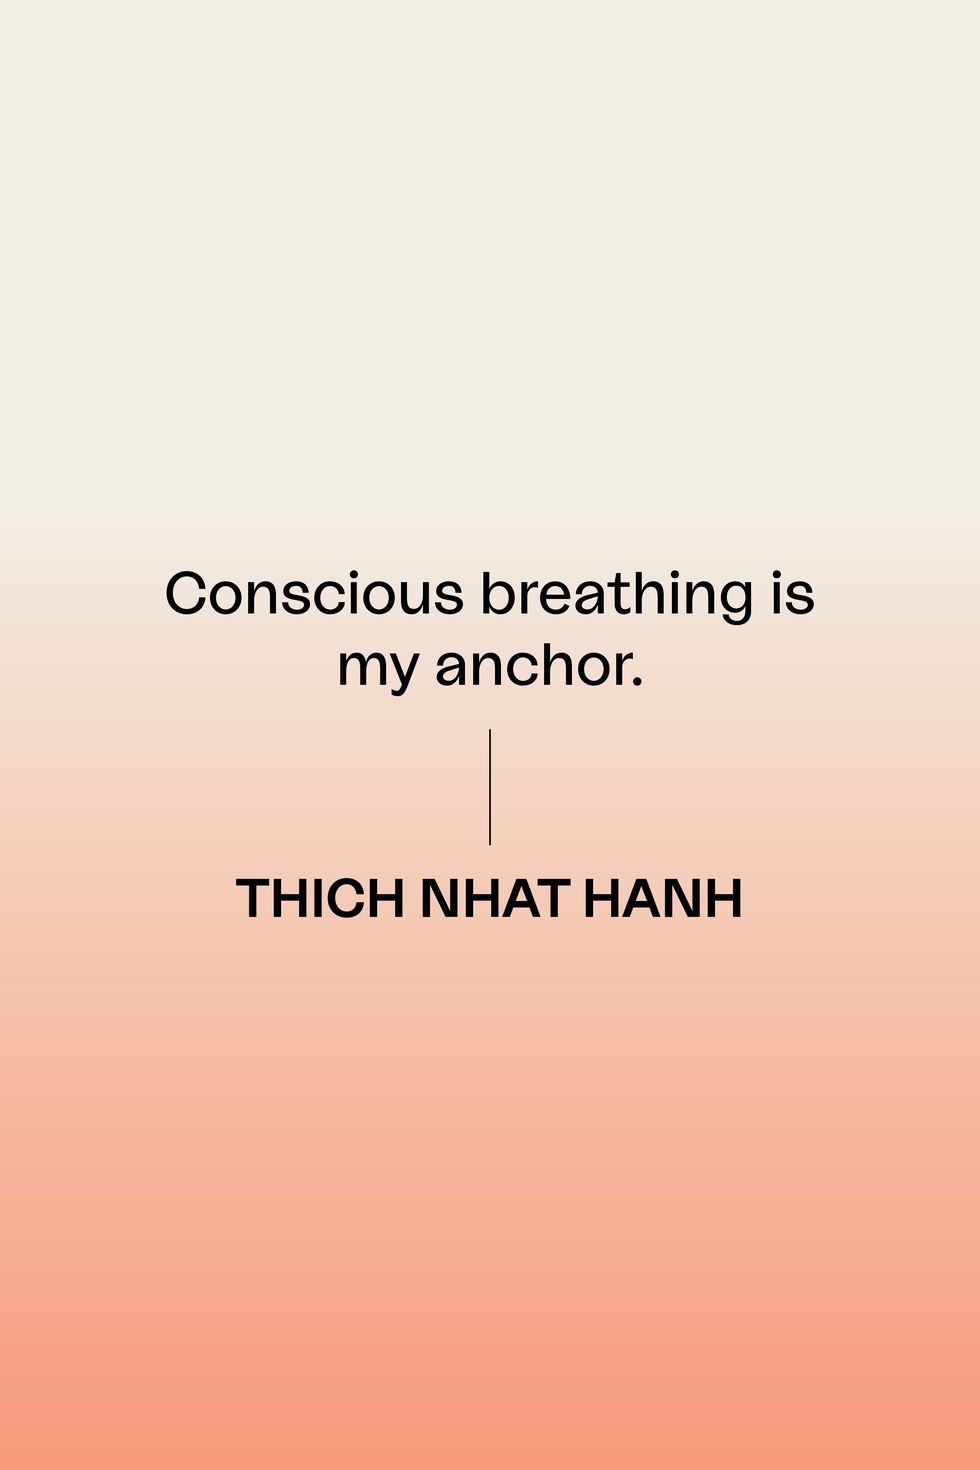 thich nhat hanh quote